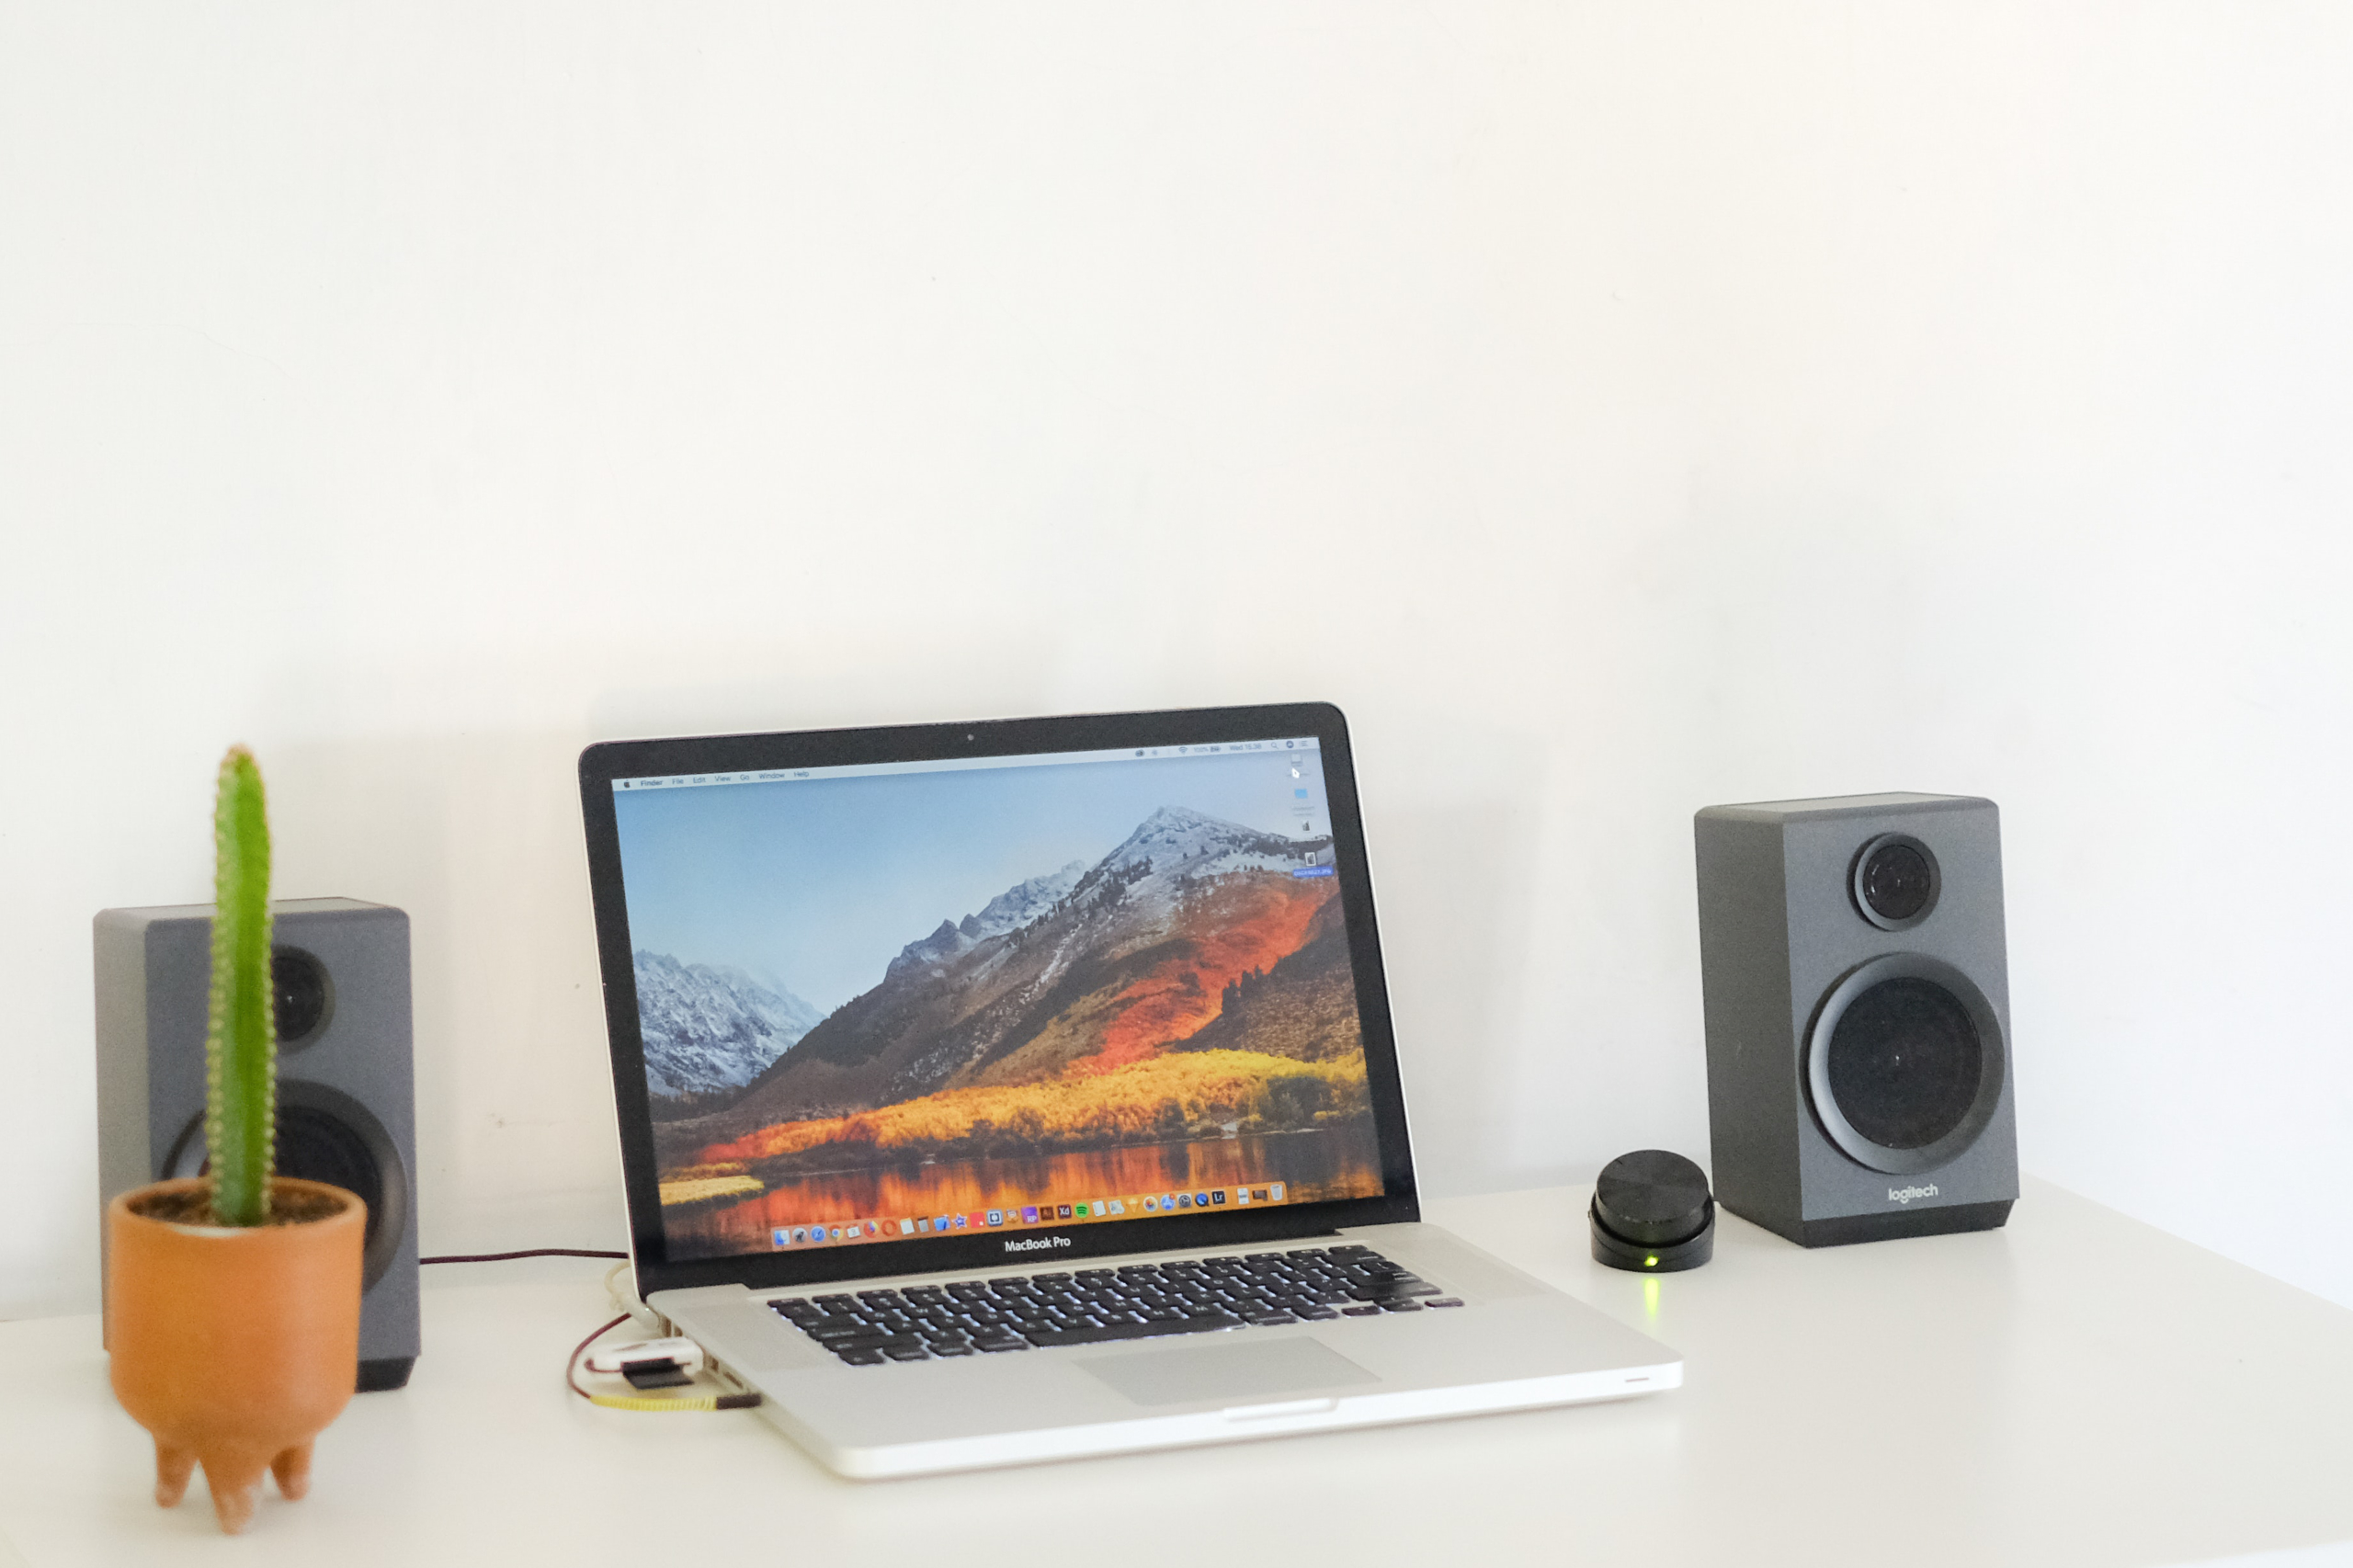 How to Turn Any Speakers Into Airplay Speakers With an Apple